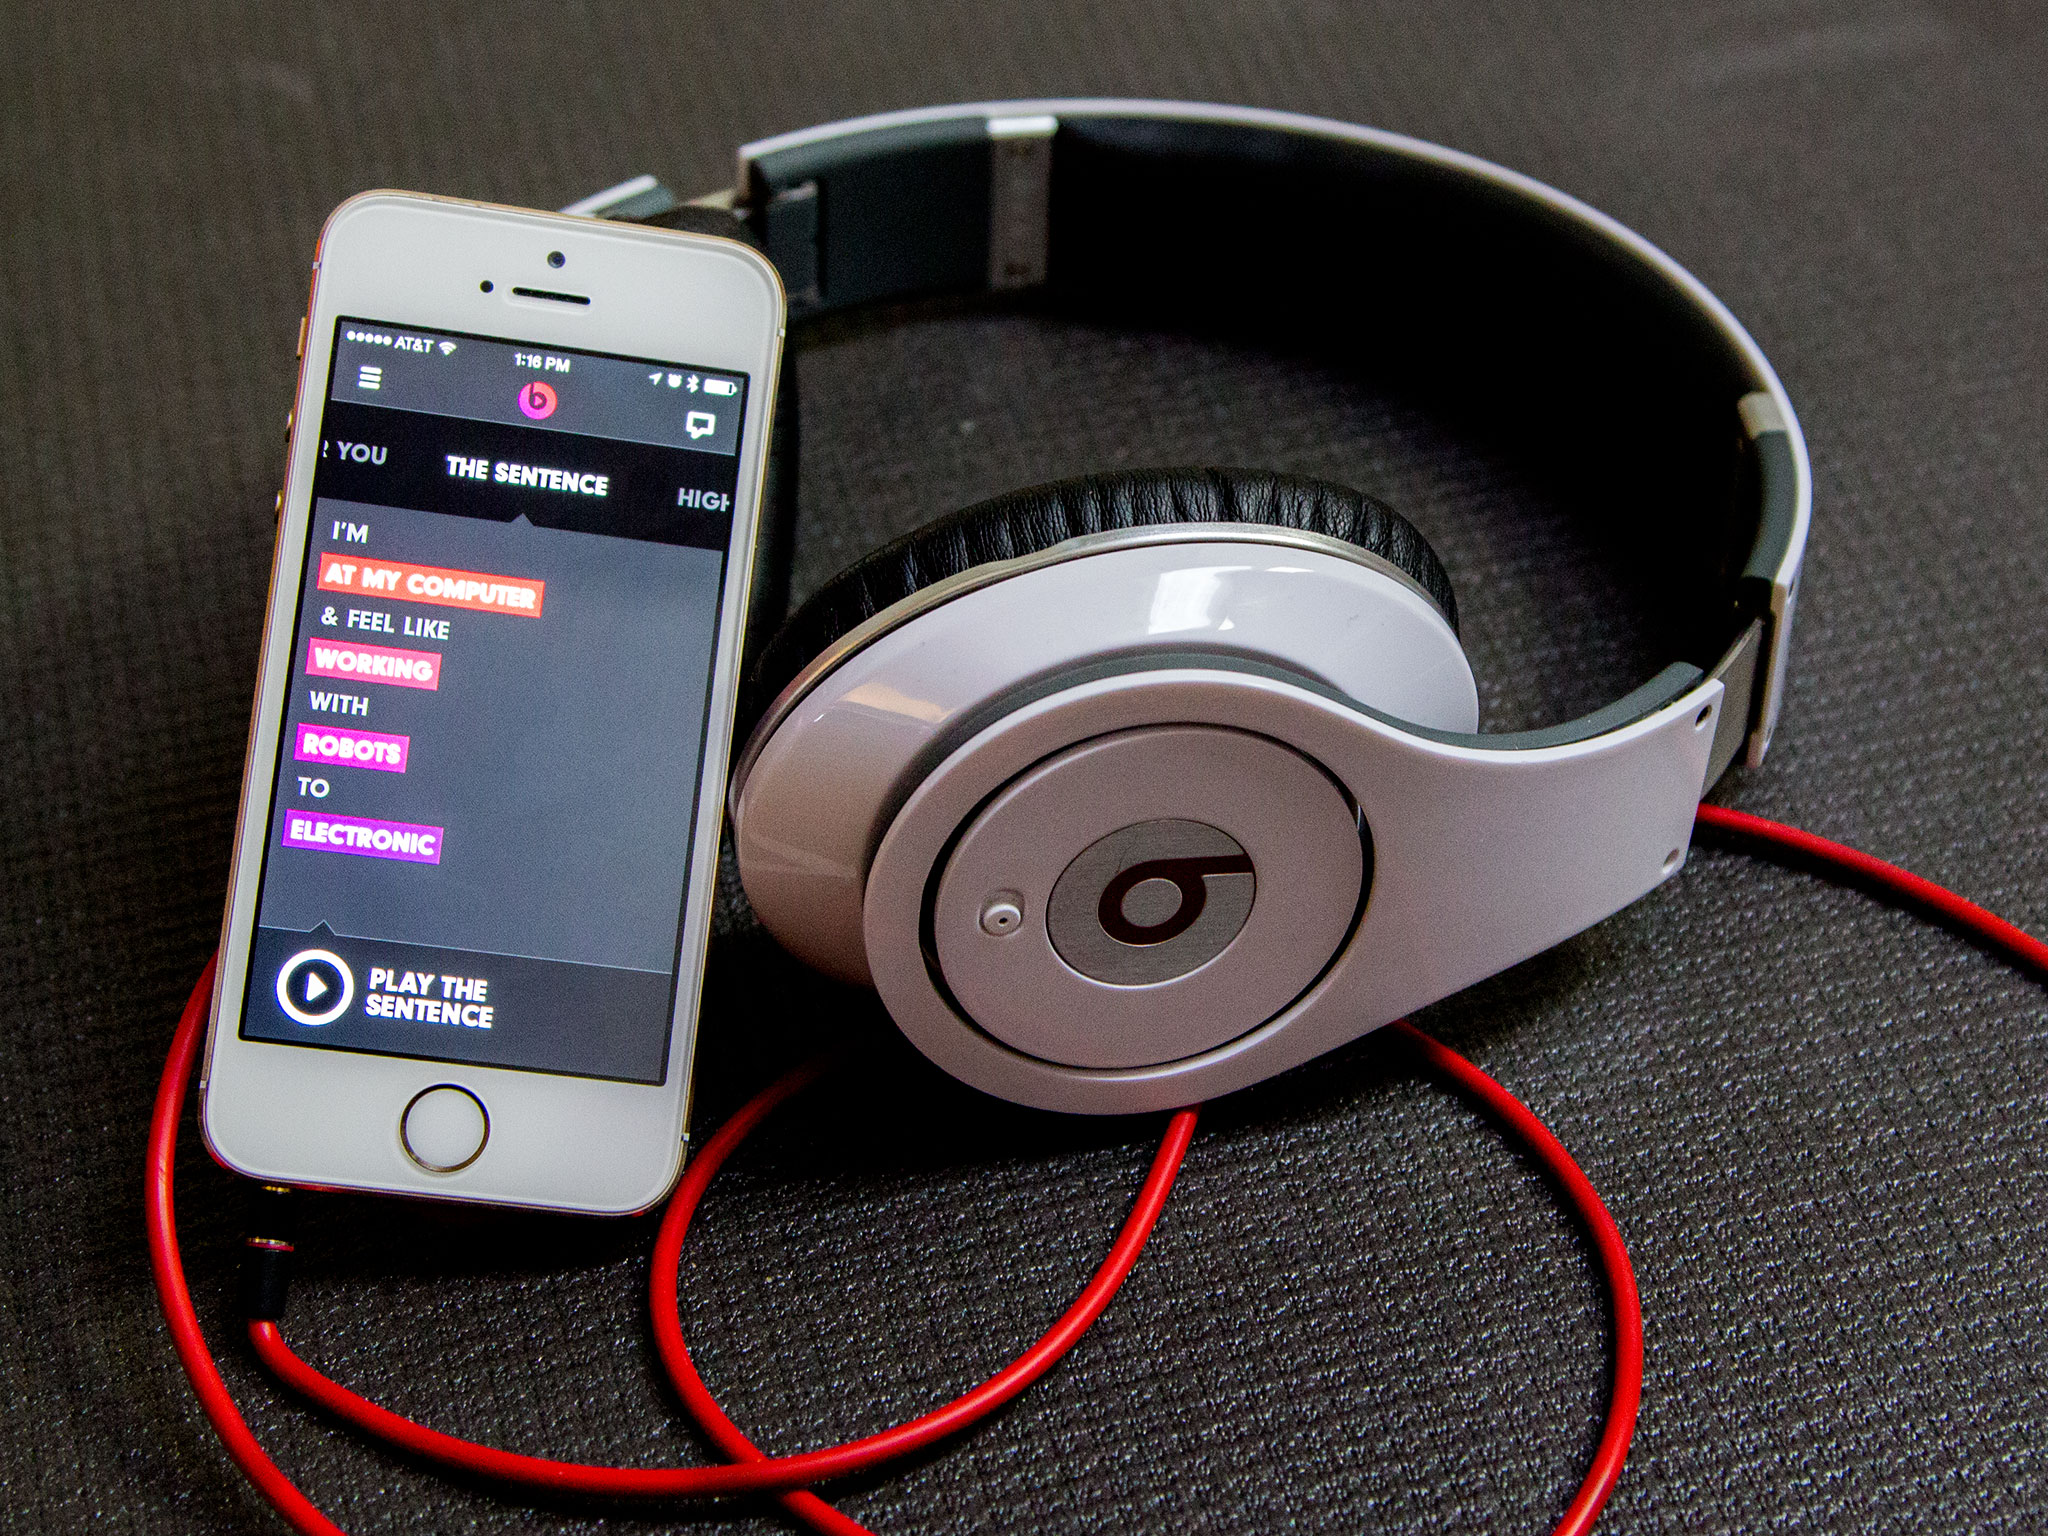 Bose and Beats agree to stop suing each other